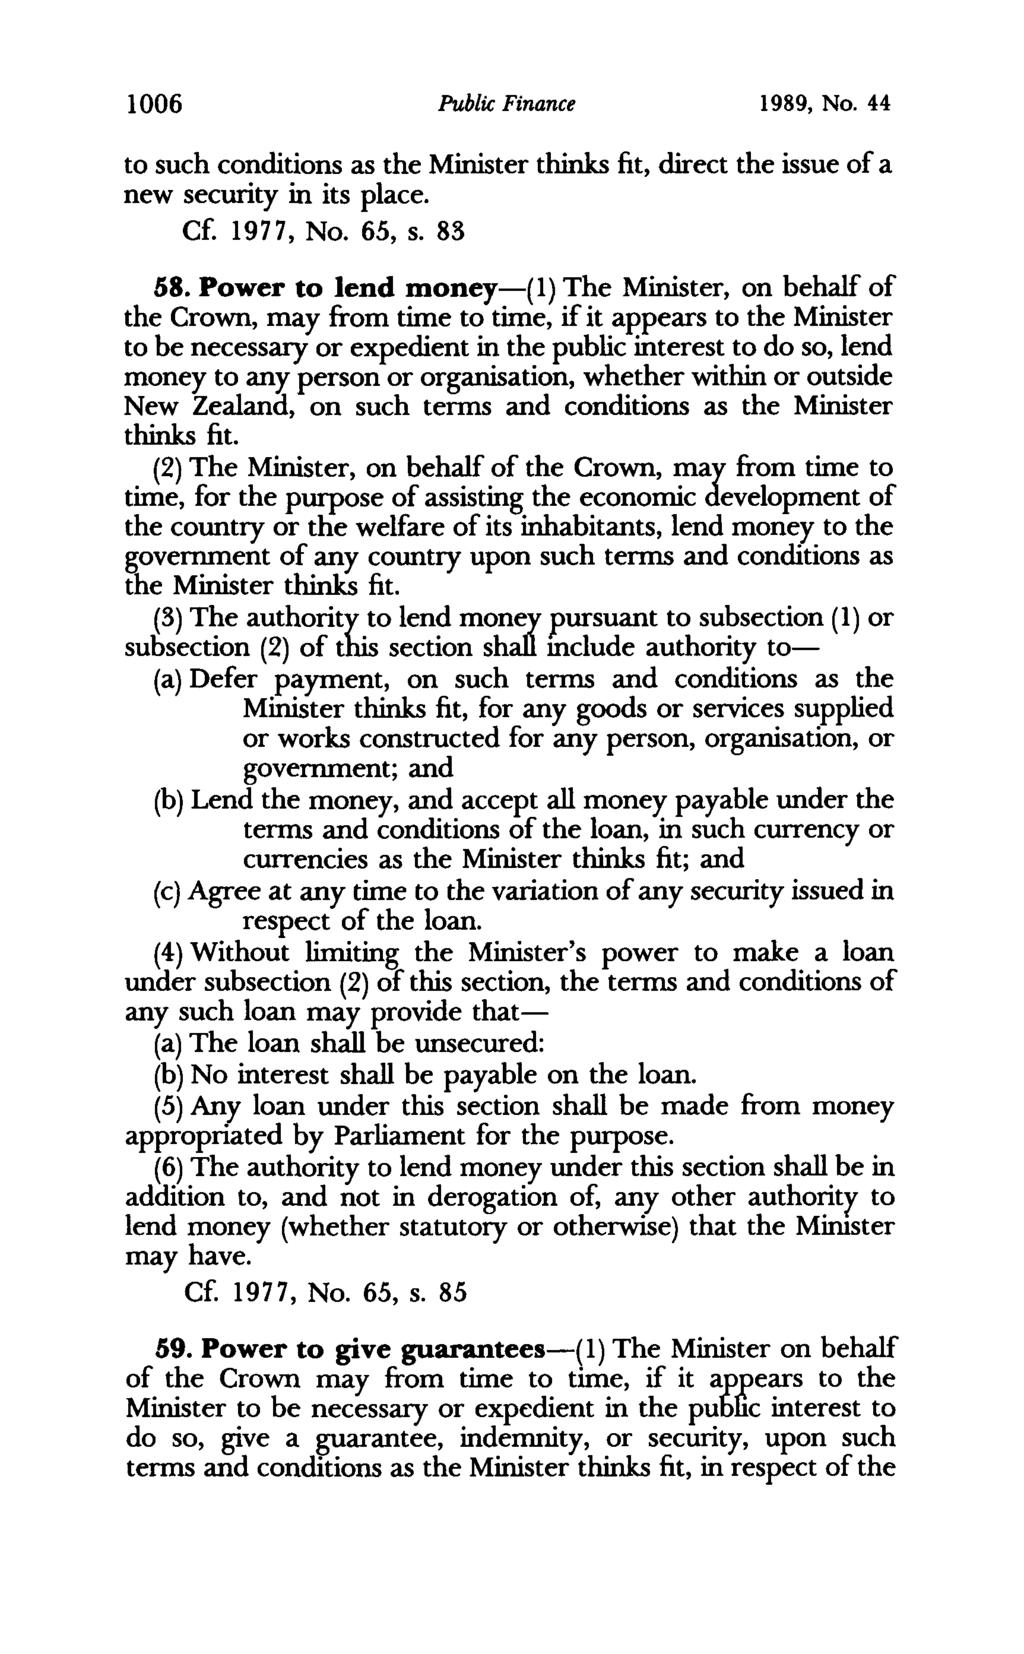 1006 Public Finance 1989, No. 44 to such conditions as the Minister thinks fit, direct the issue of a new security in its place. Cf. 1977, No. 65, s. 83 58.